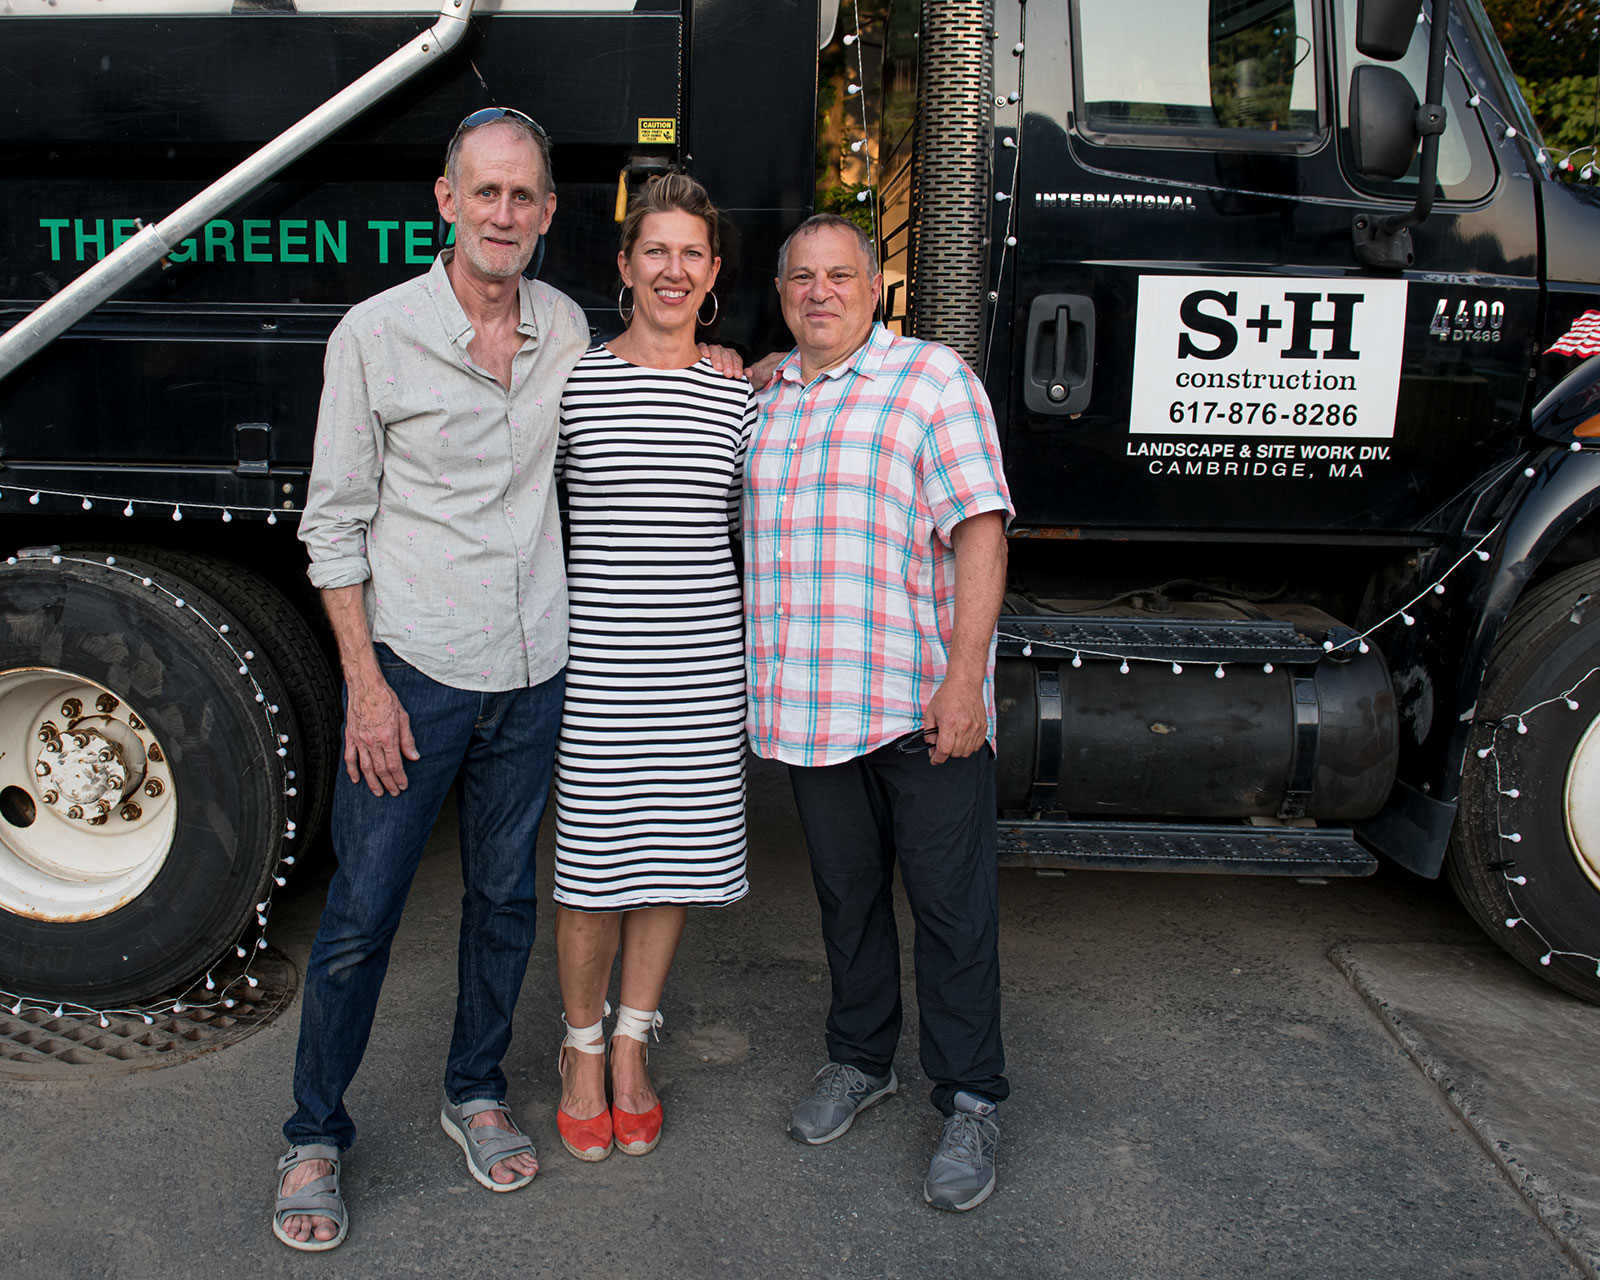 Founders Alex Slive and Doug Hanna of S+H Construction flank President and Owner Sarah Lawson